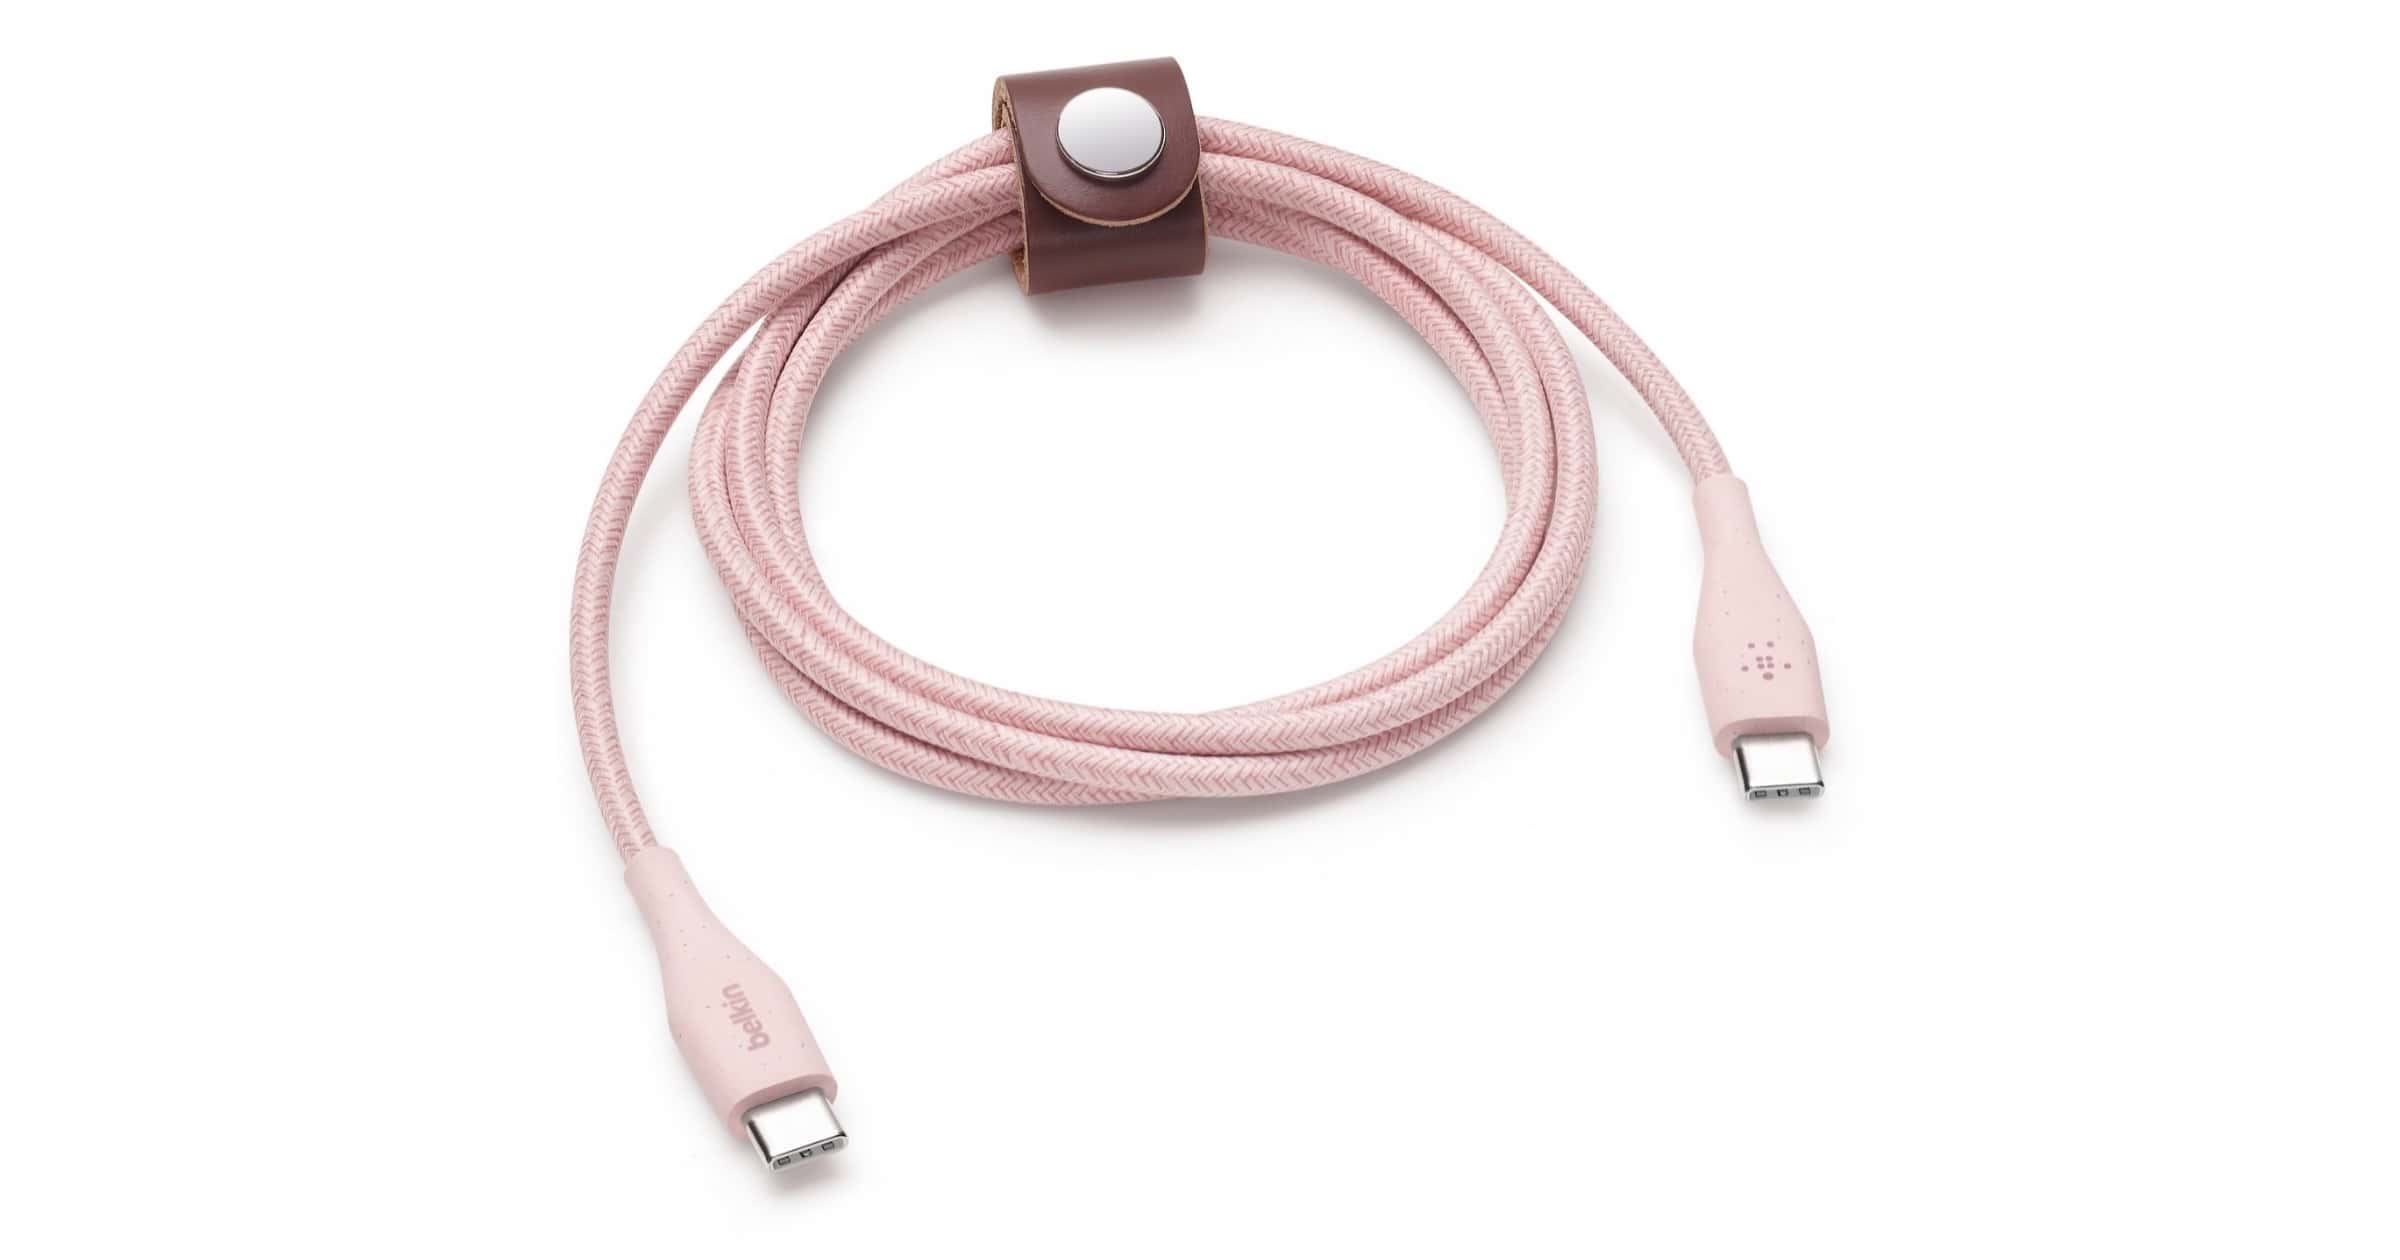 Belkin Offers Apple Watch Chargers, Cables and More